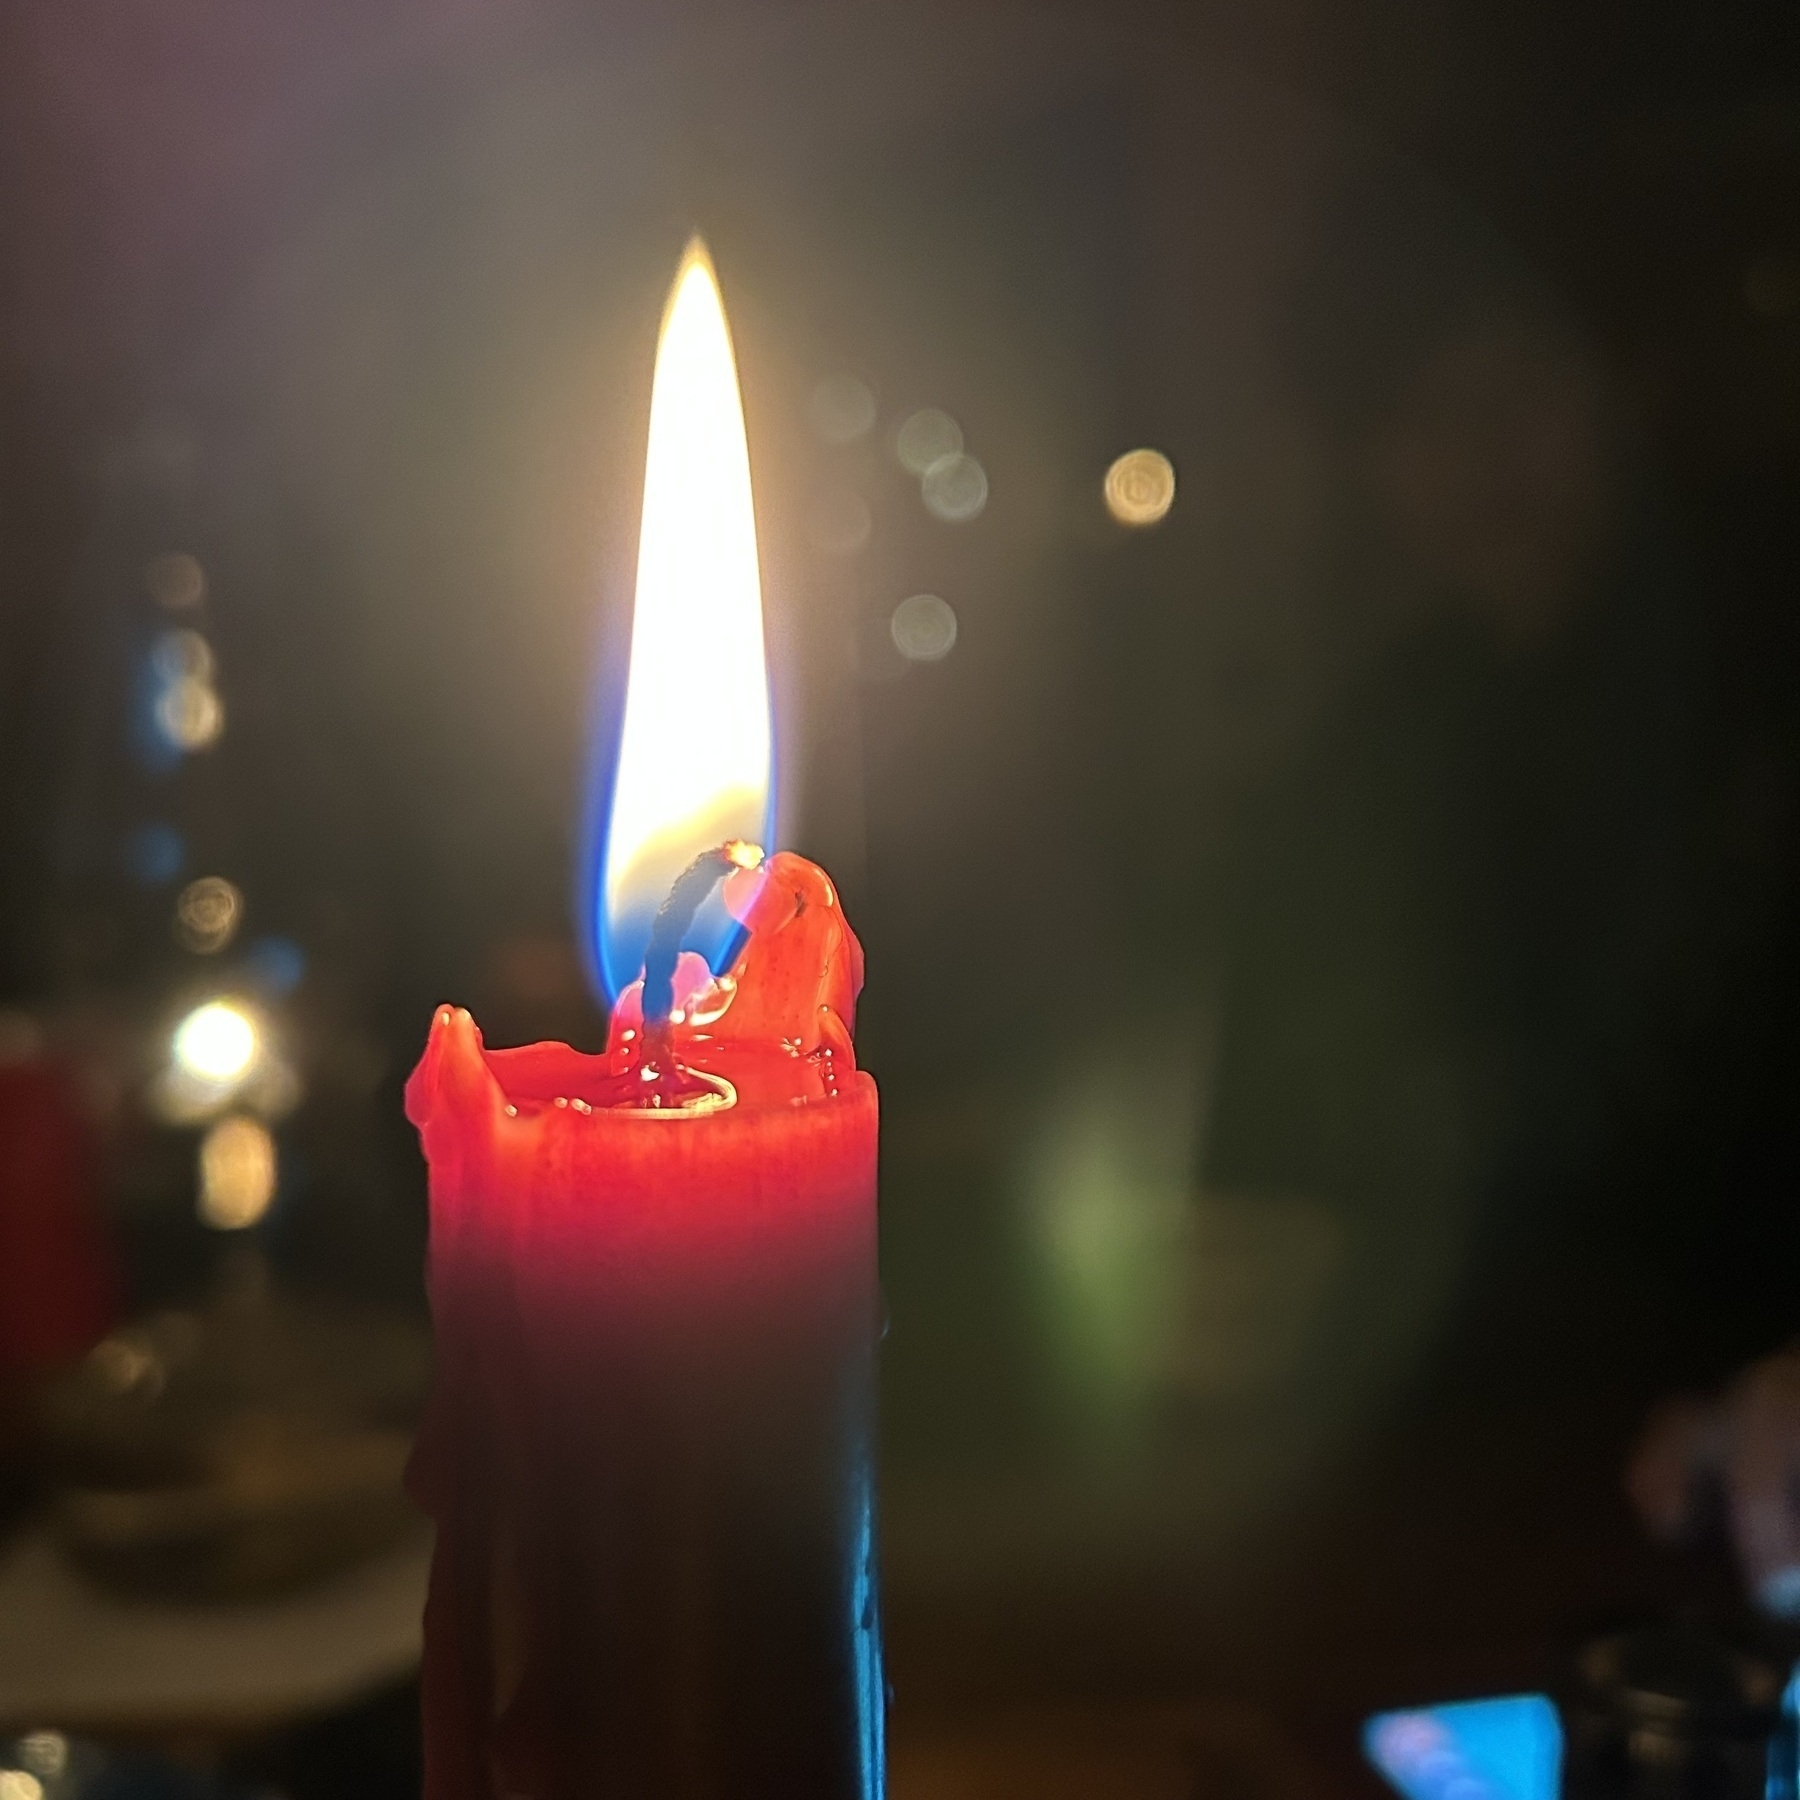 The glowing flame of a red candle.